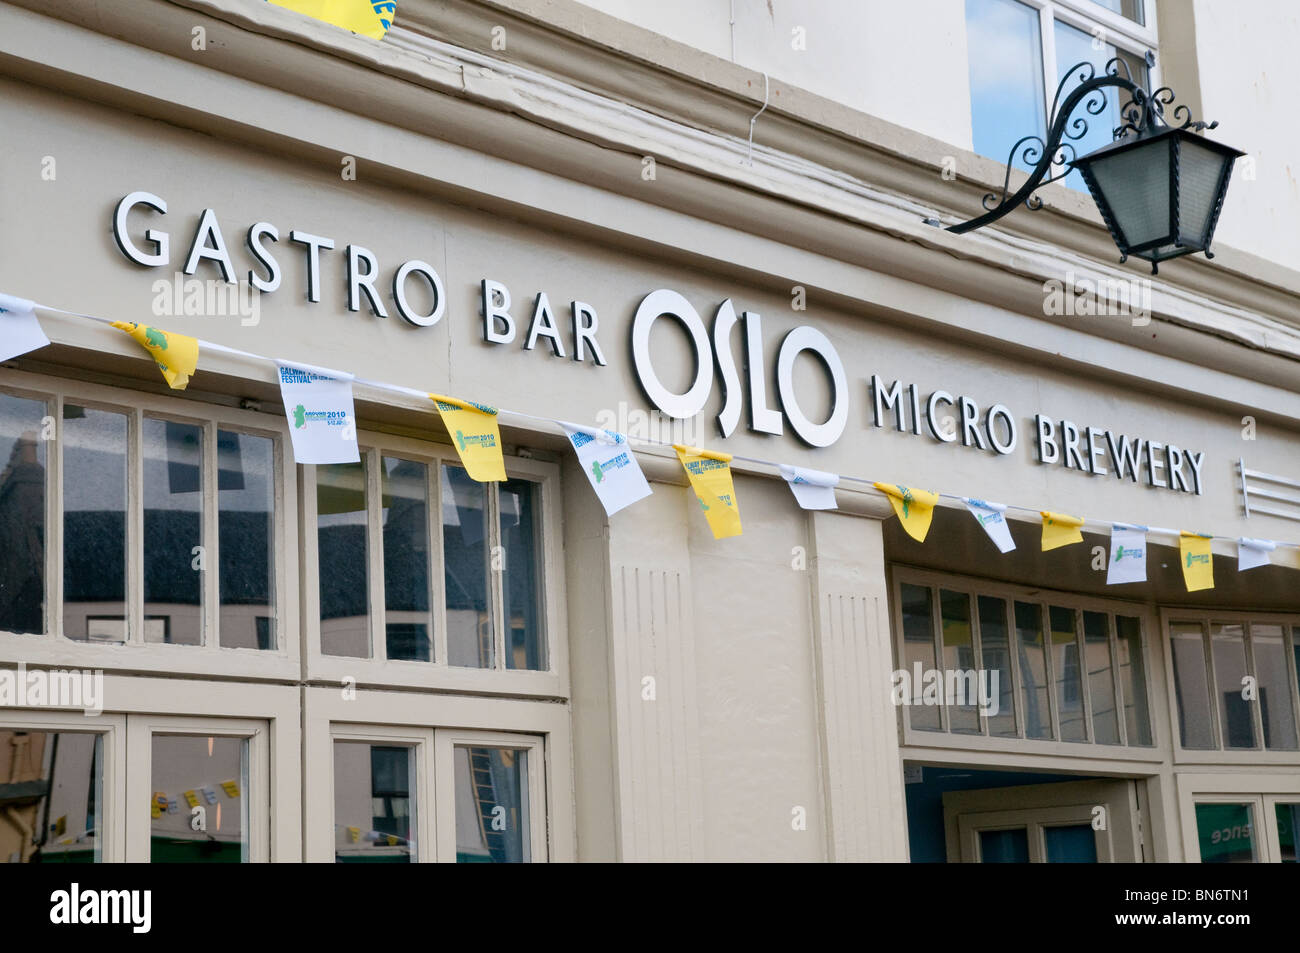 Close up of exterior signage for Oslo microbrewery and gastro bar in Salthill, Galway, Ireland Stock Photo